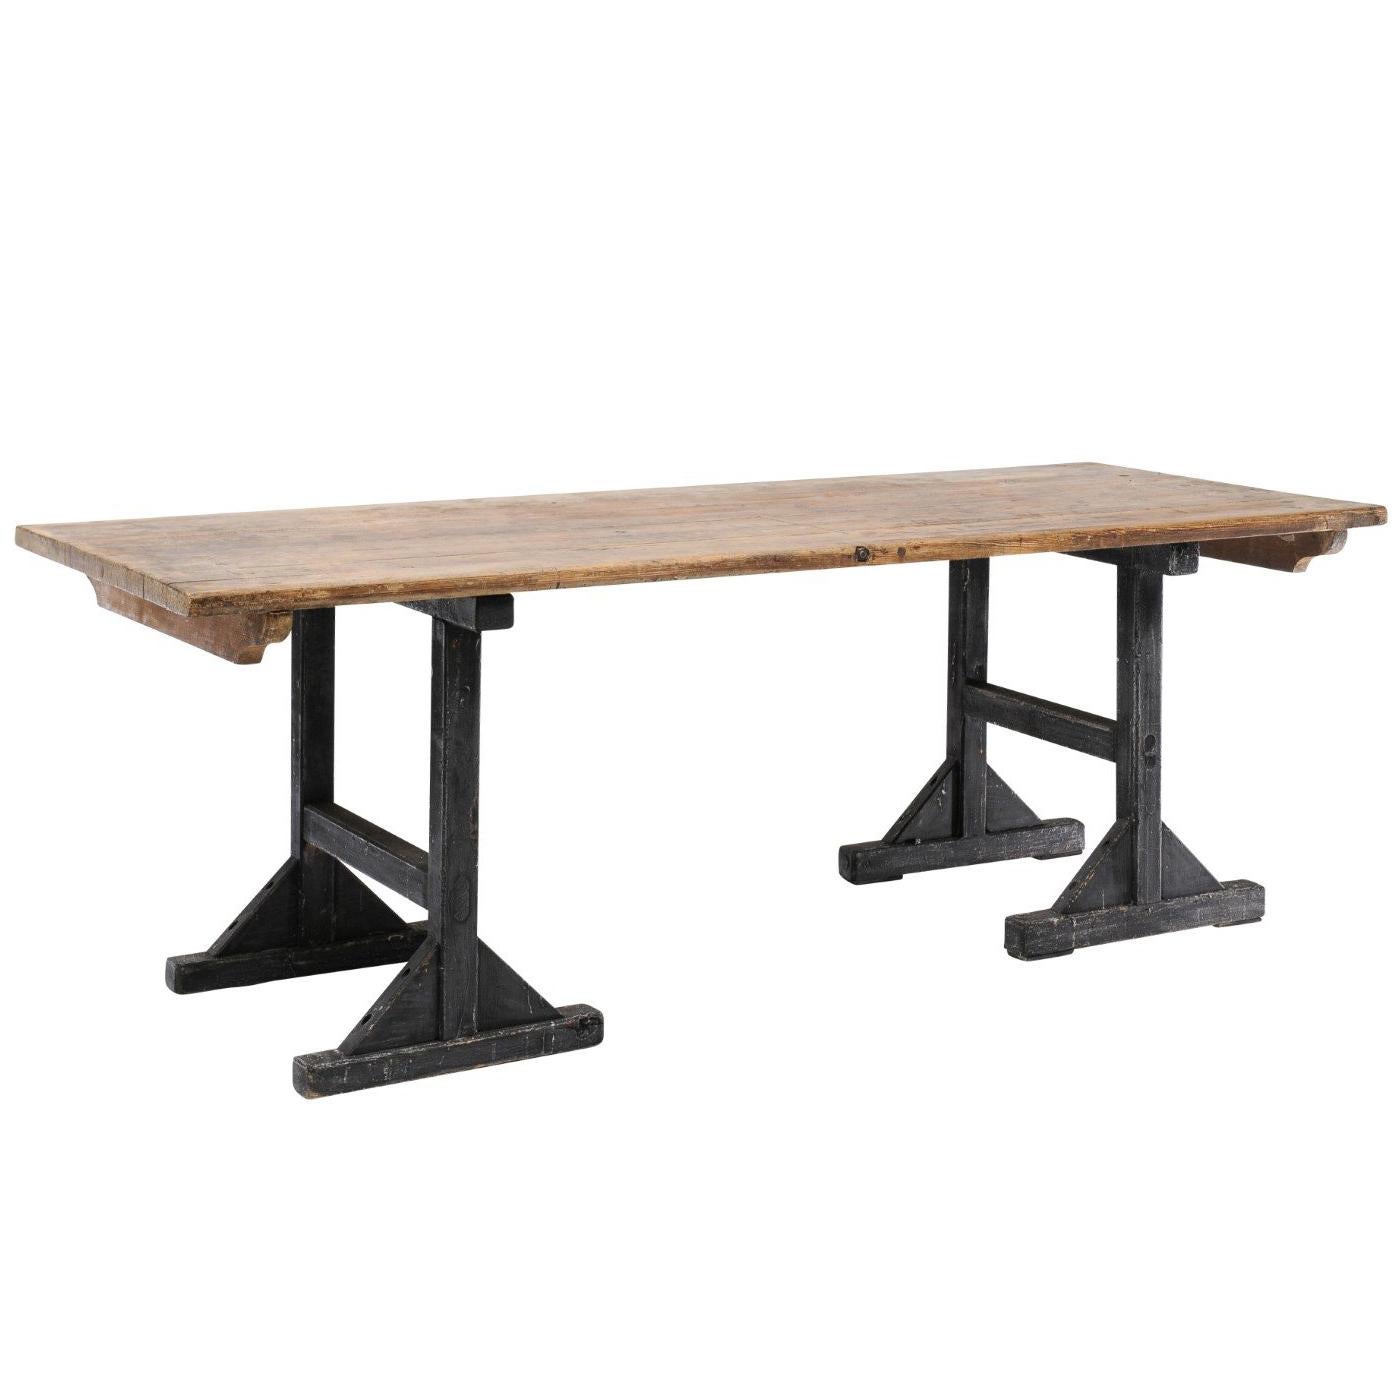 Northern French Long Pine Work Table with Black-Painted Trestle Base, circa 1920